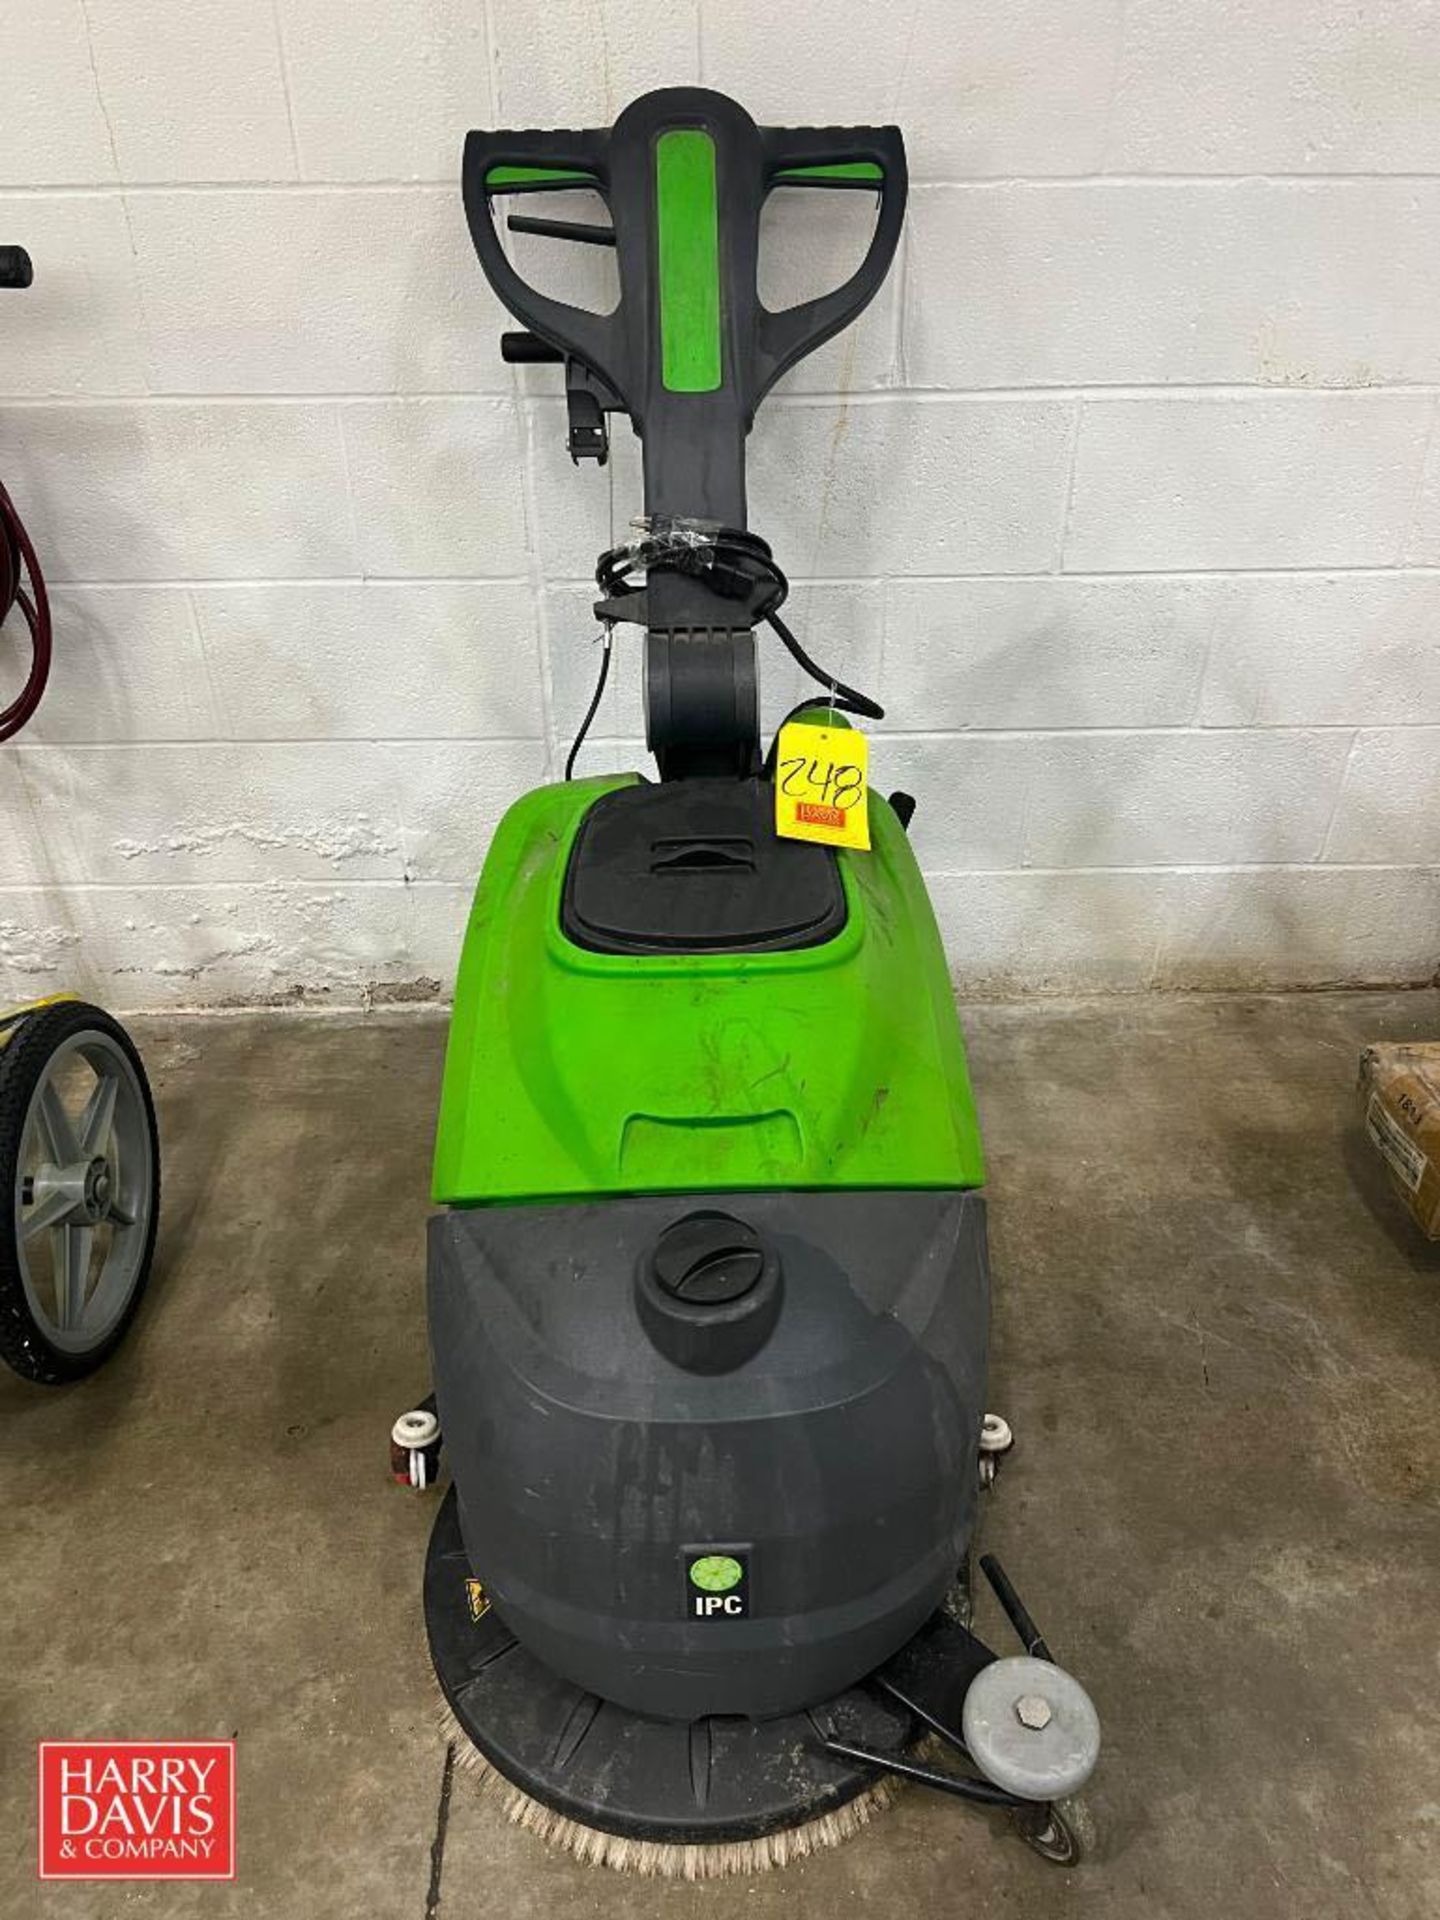 Gansow Walk-Behind Electric Floor Scrubber, Model: CT30 - Rigging Fee: $75 - Image 2 of 2